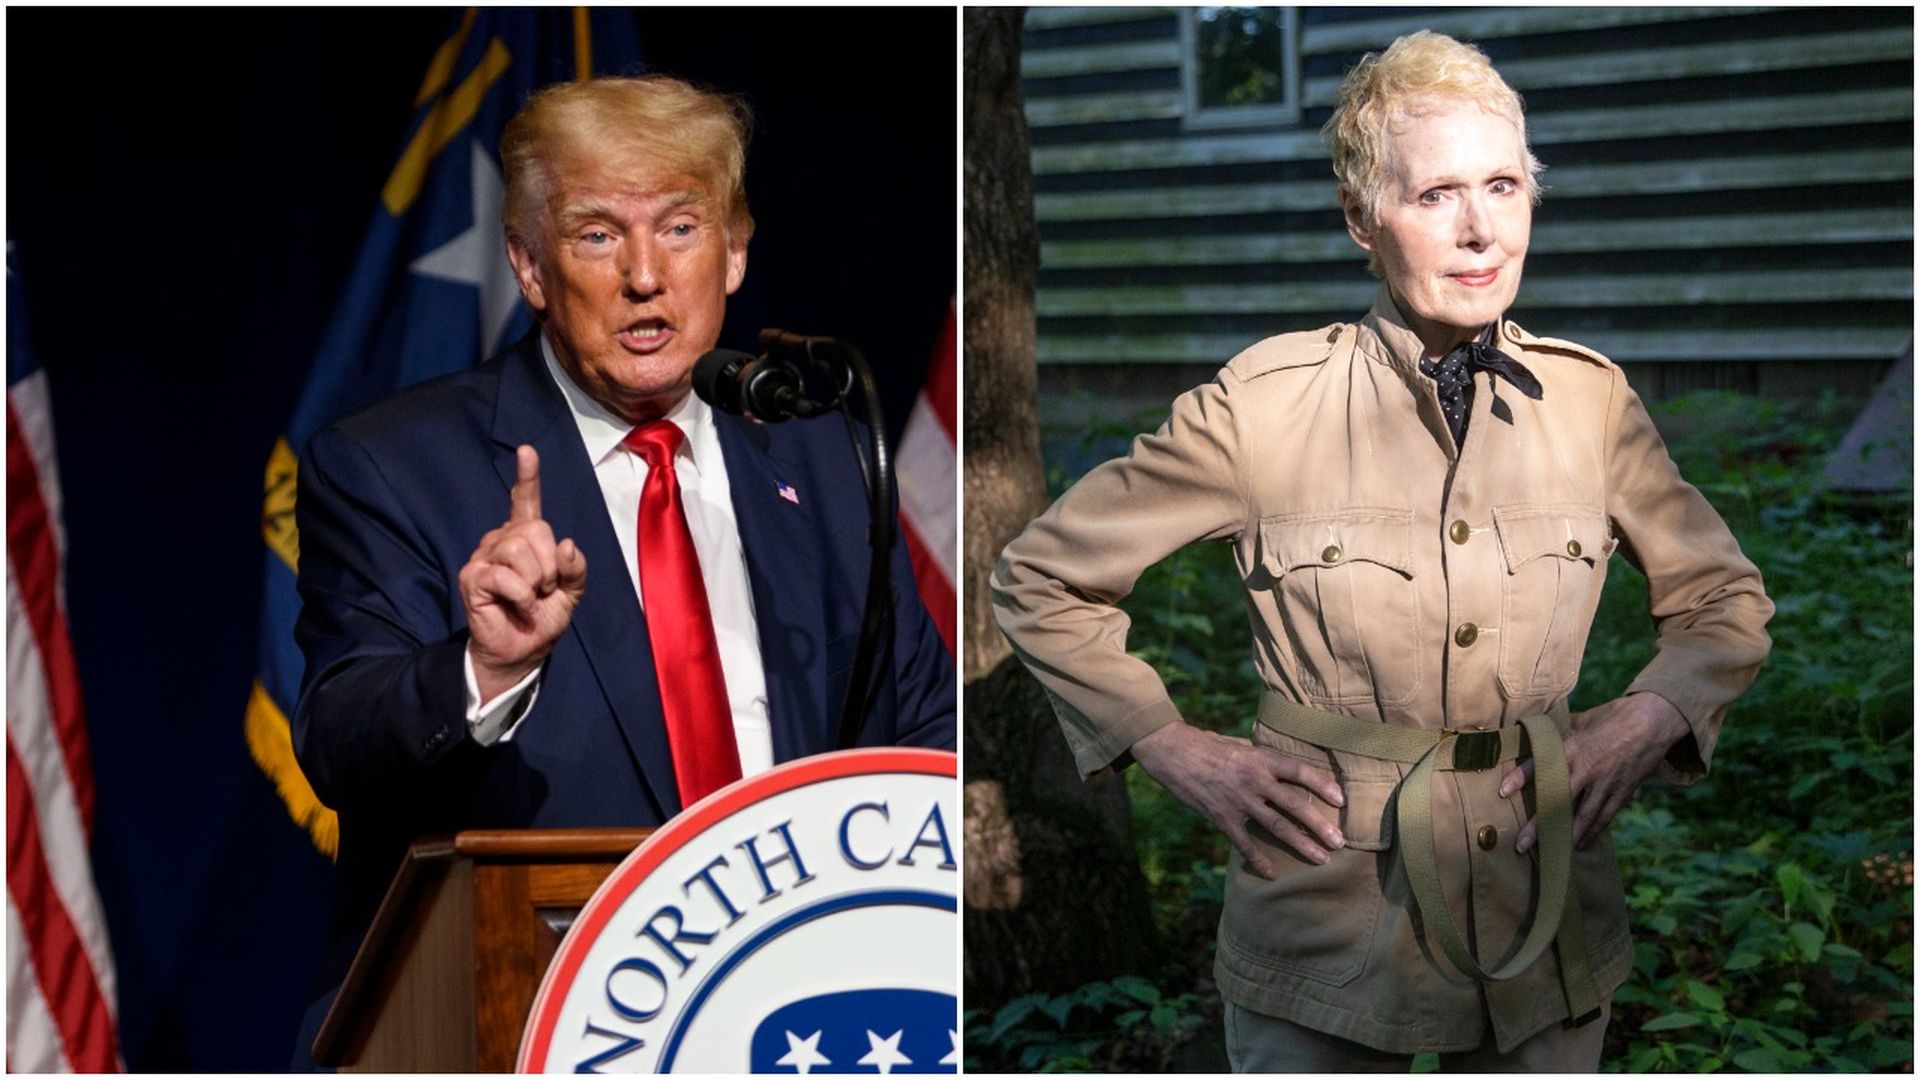 Combination images of former President Trump and E. Jean Carroll.